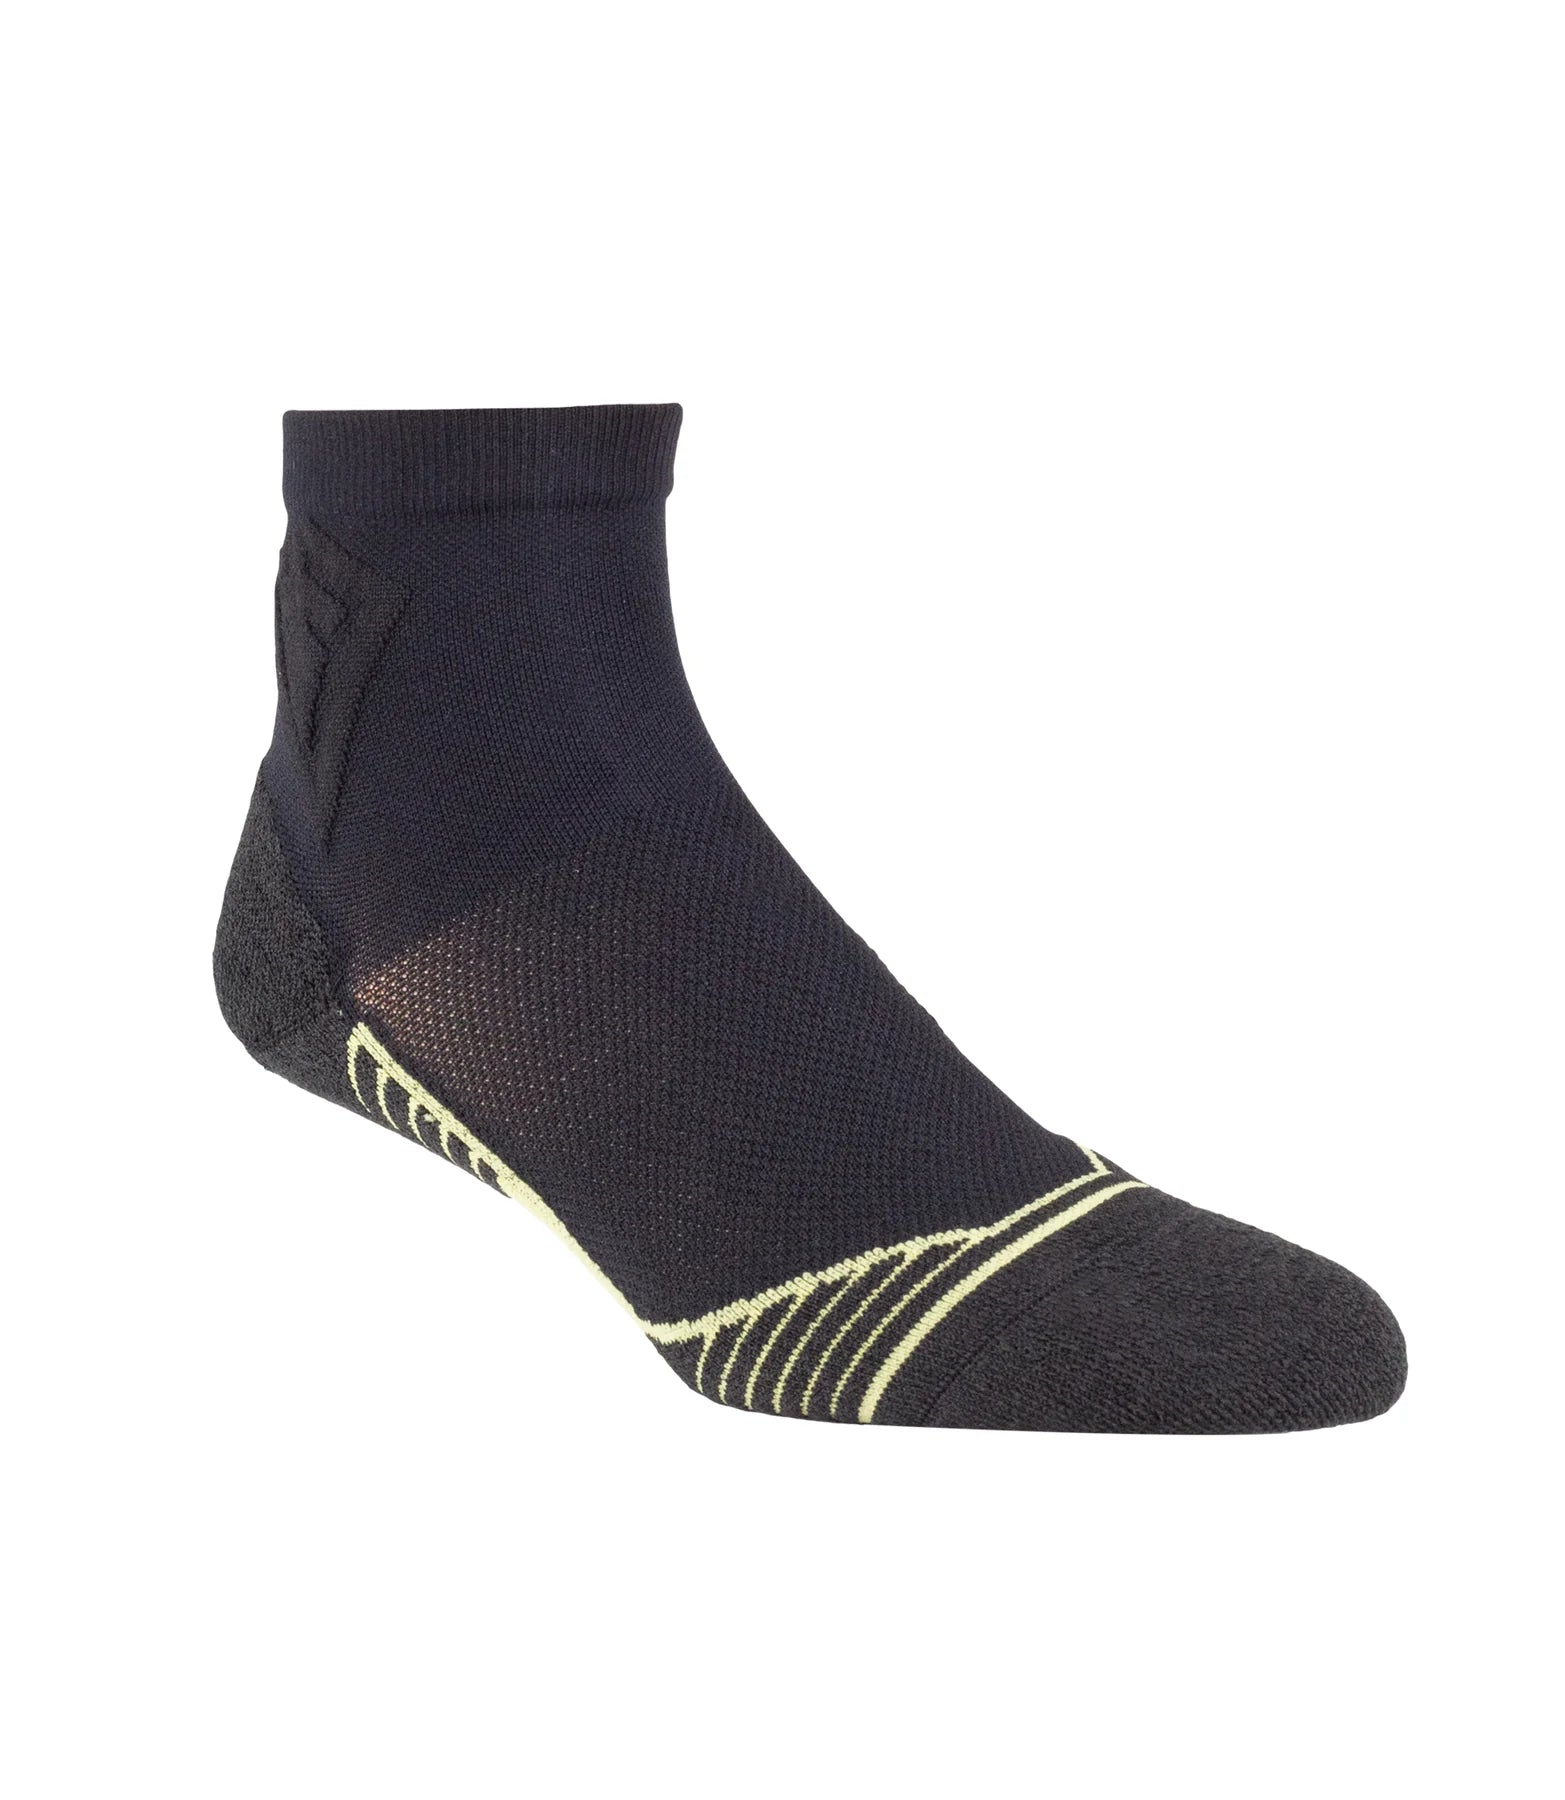 First Tactical - ADVANCED FIT LOW CUT SOCK